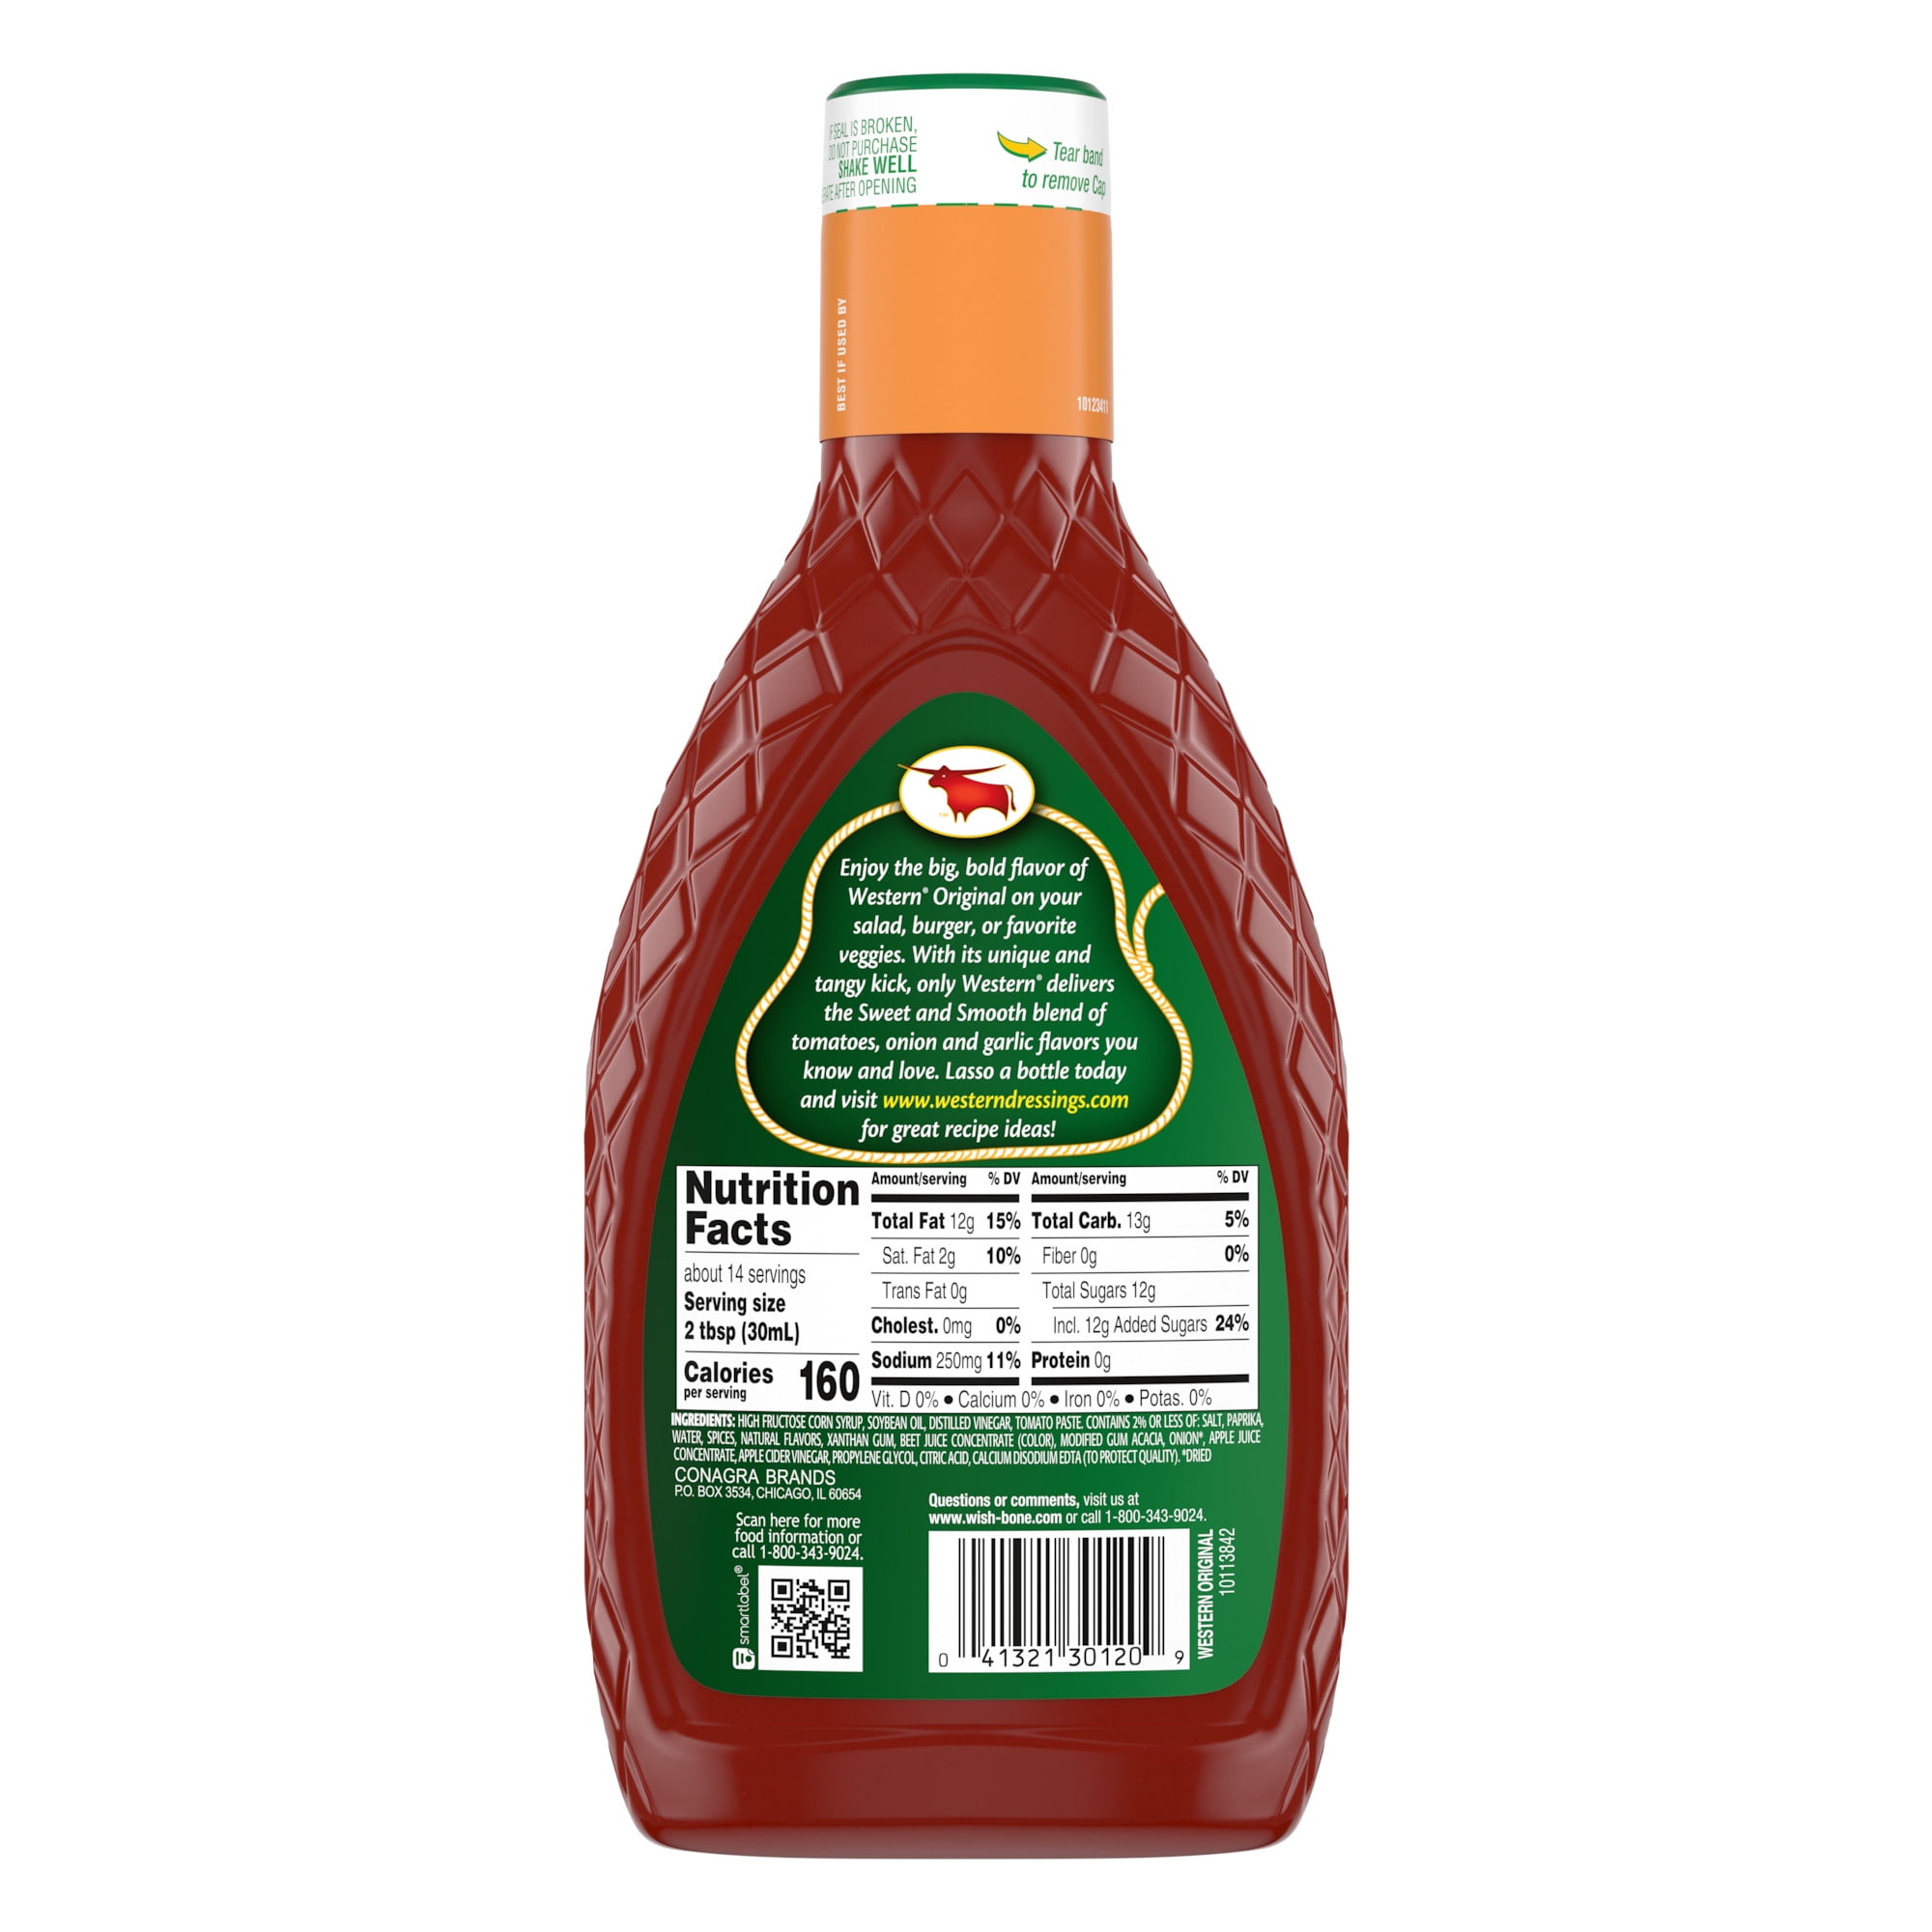 Woeber's Sandwich Dressing - 16oz (Springfield, OH) – Local Flavoring